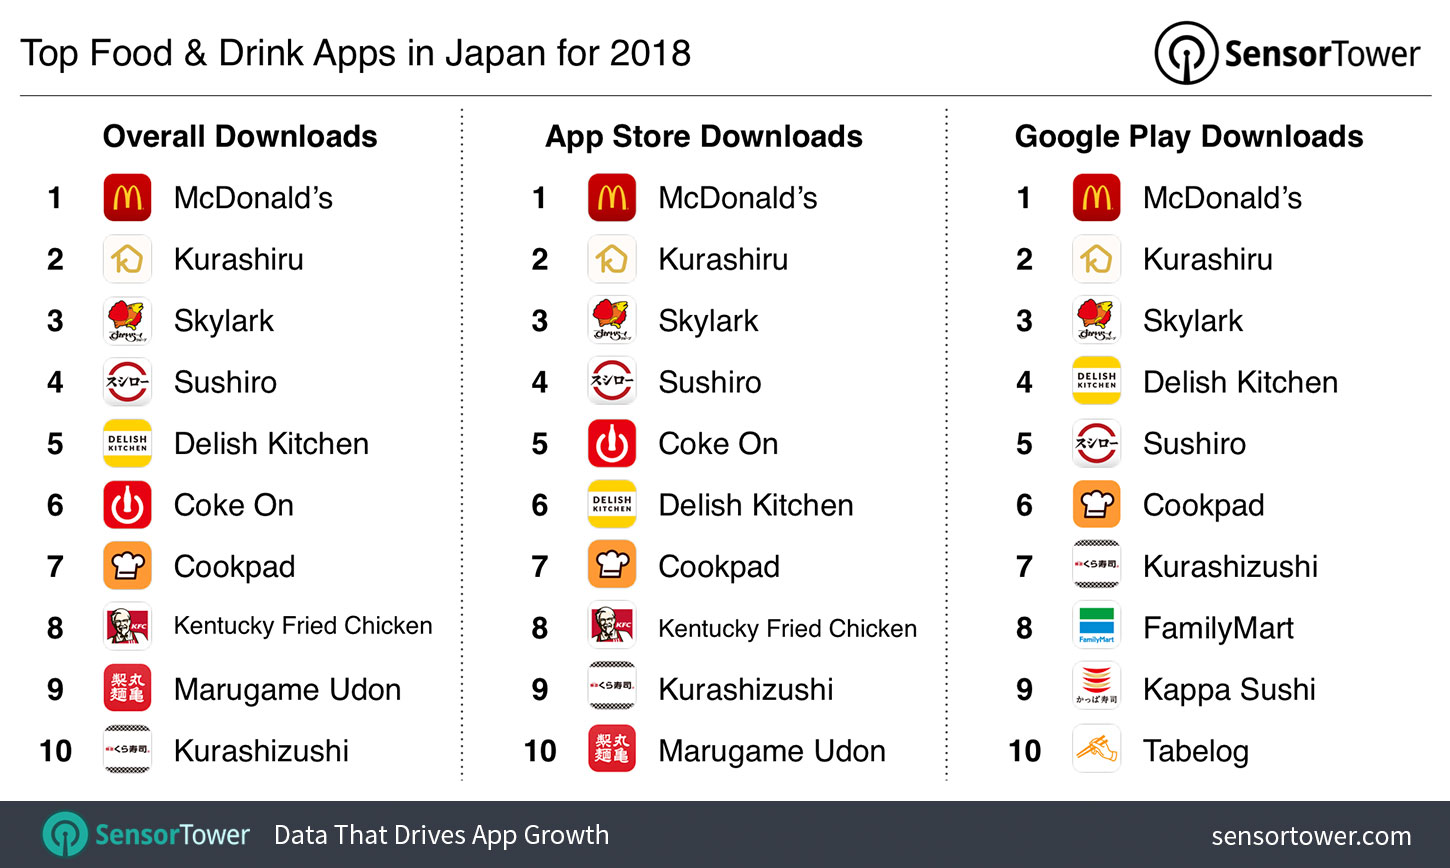 Top Food & Drink Apps in Japan for 2018 by Downloads